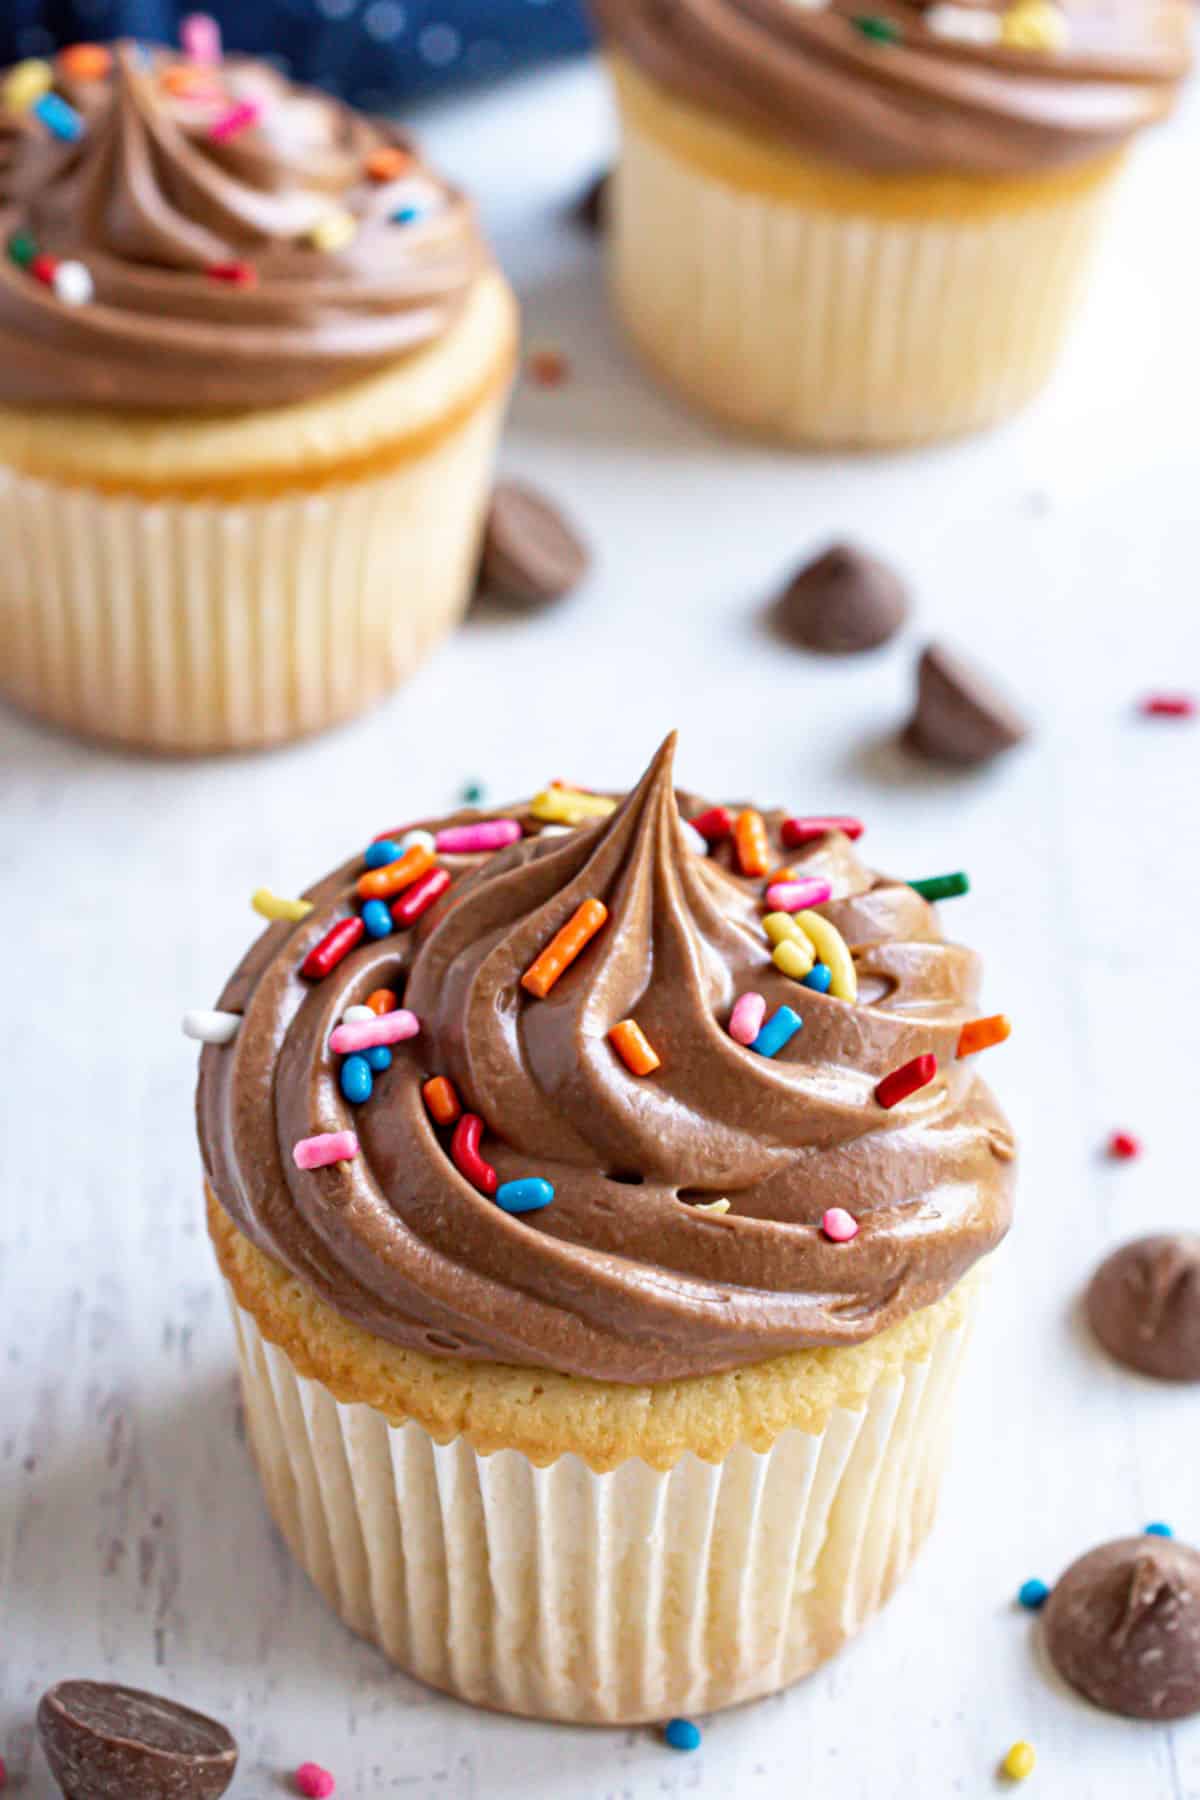 Yellow cupcake with chocolate frosting and sprinkles.